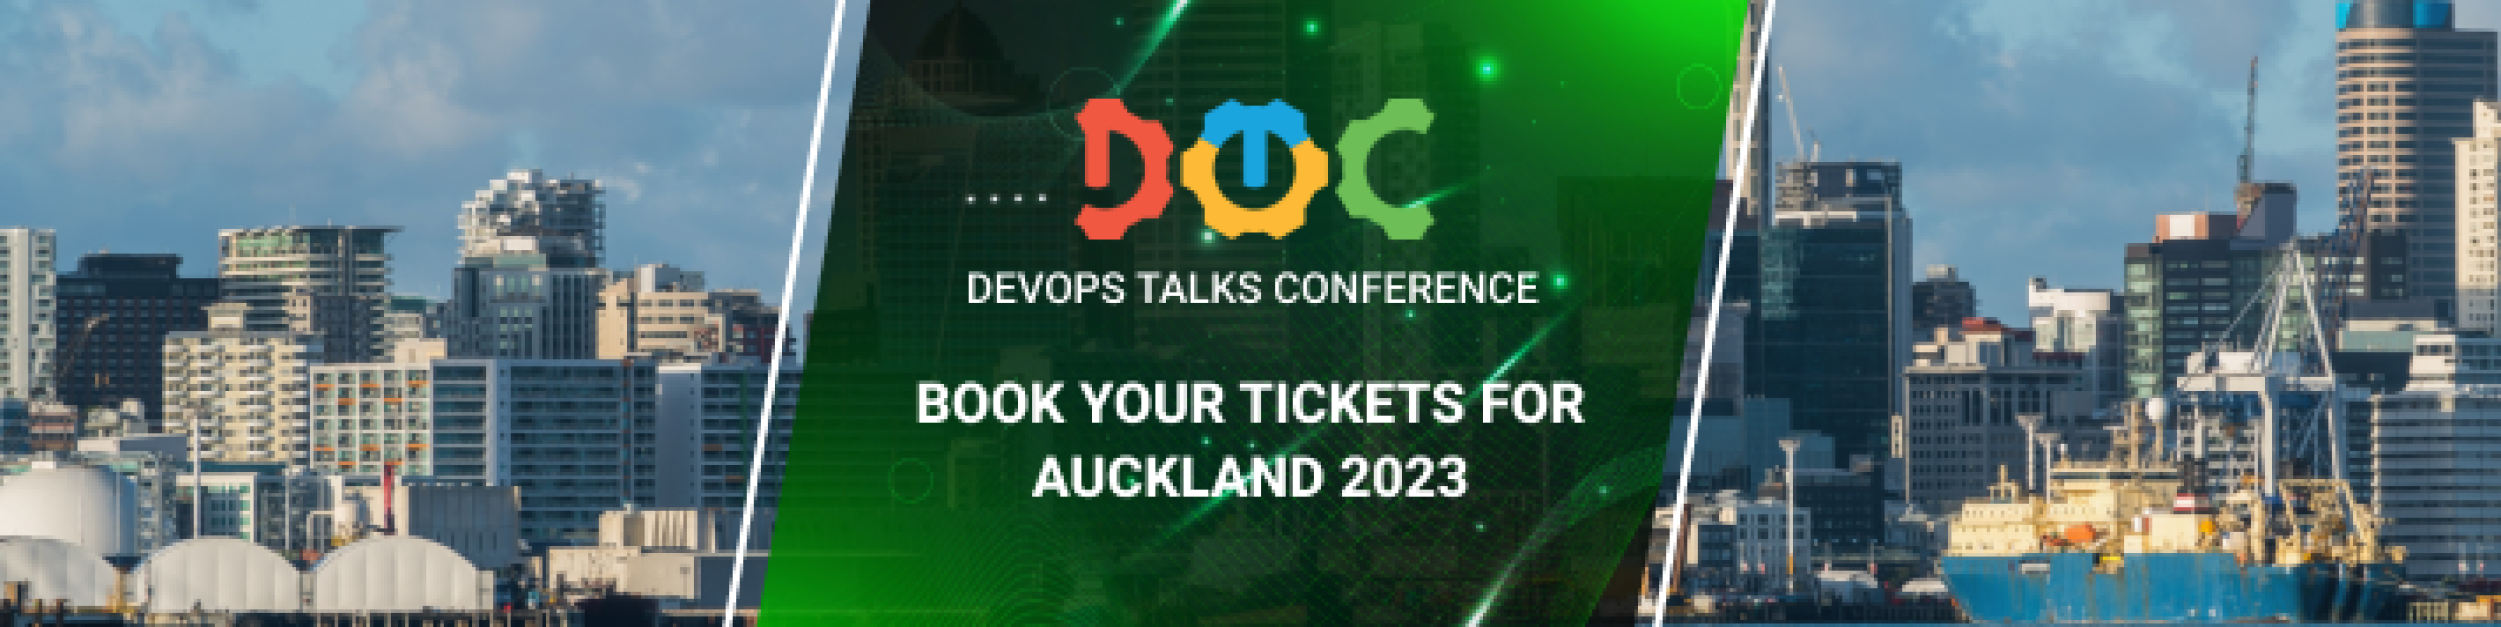 Book your tickets for Auckland 2023